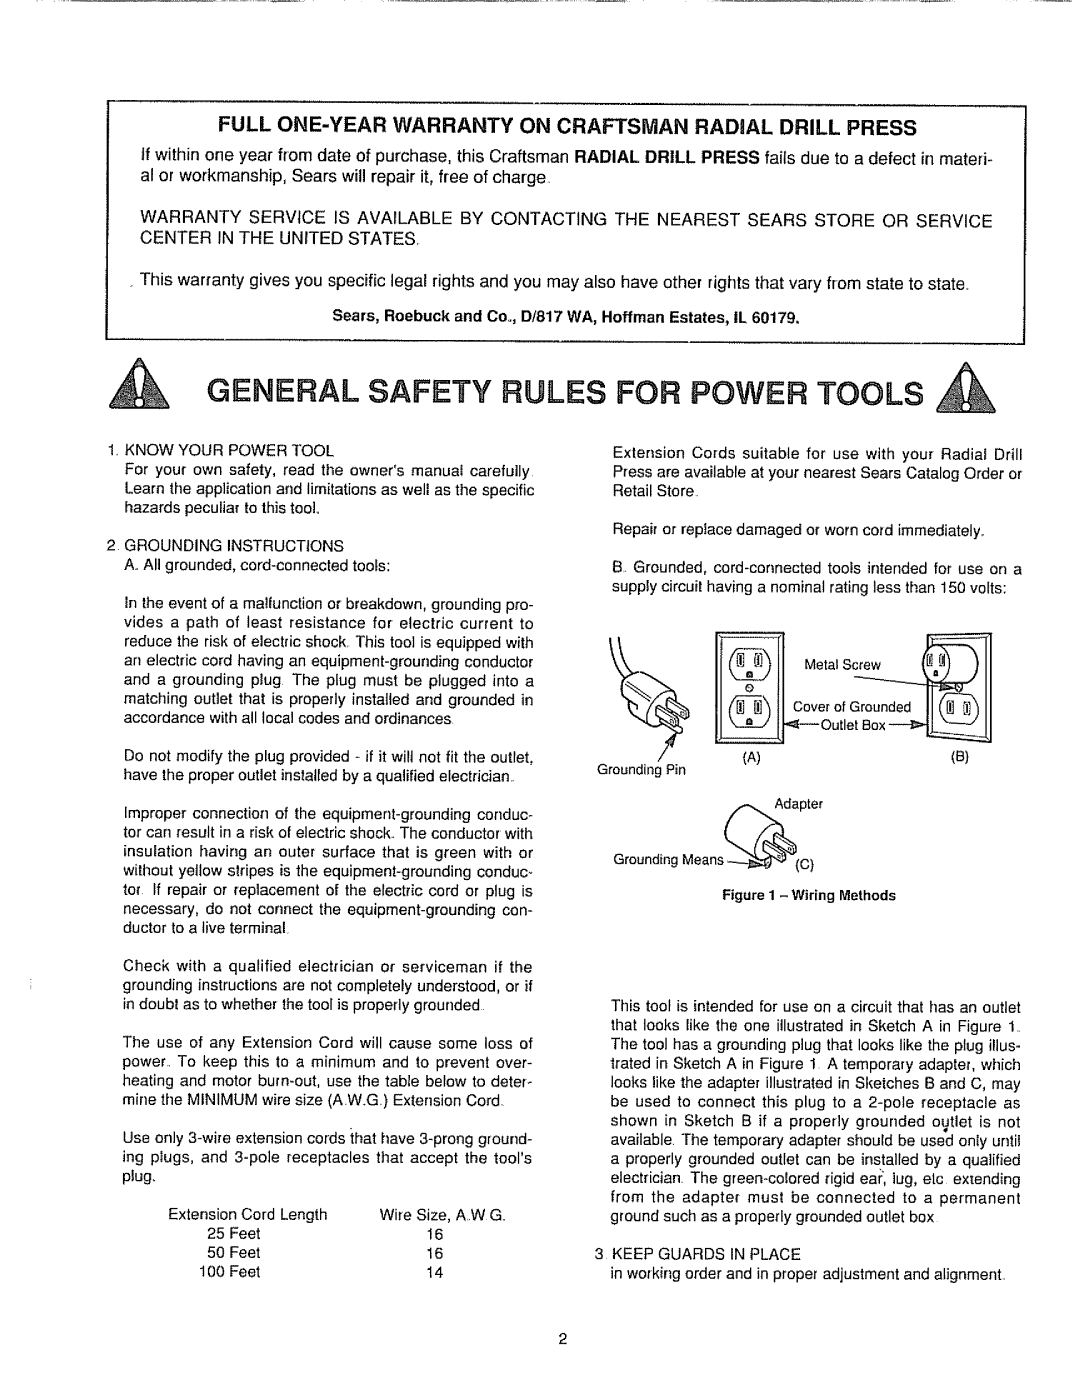 Sears 149.213340 warranty General Safety Rules, For Power Tools, rofGroundedII 